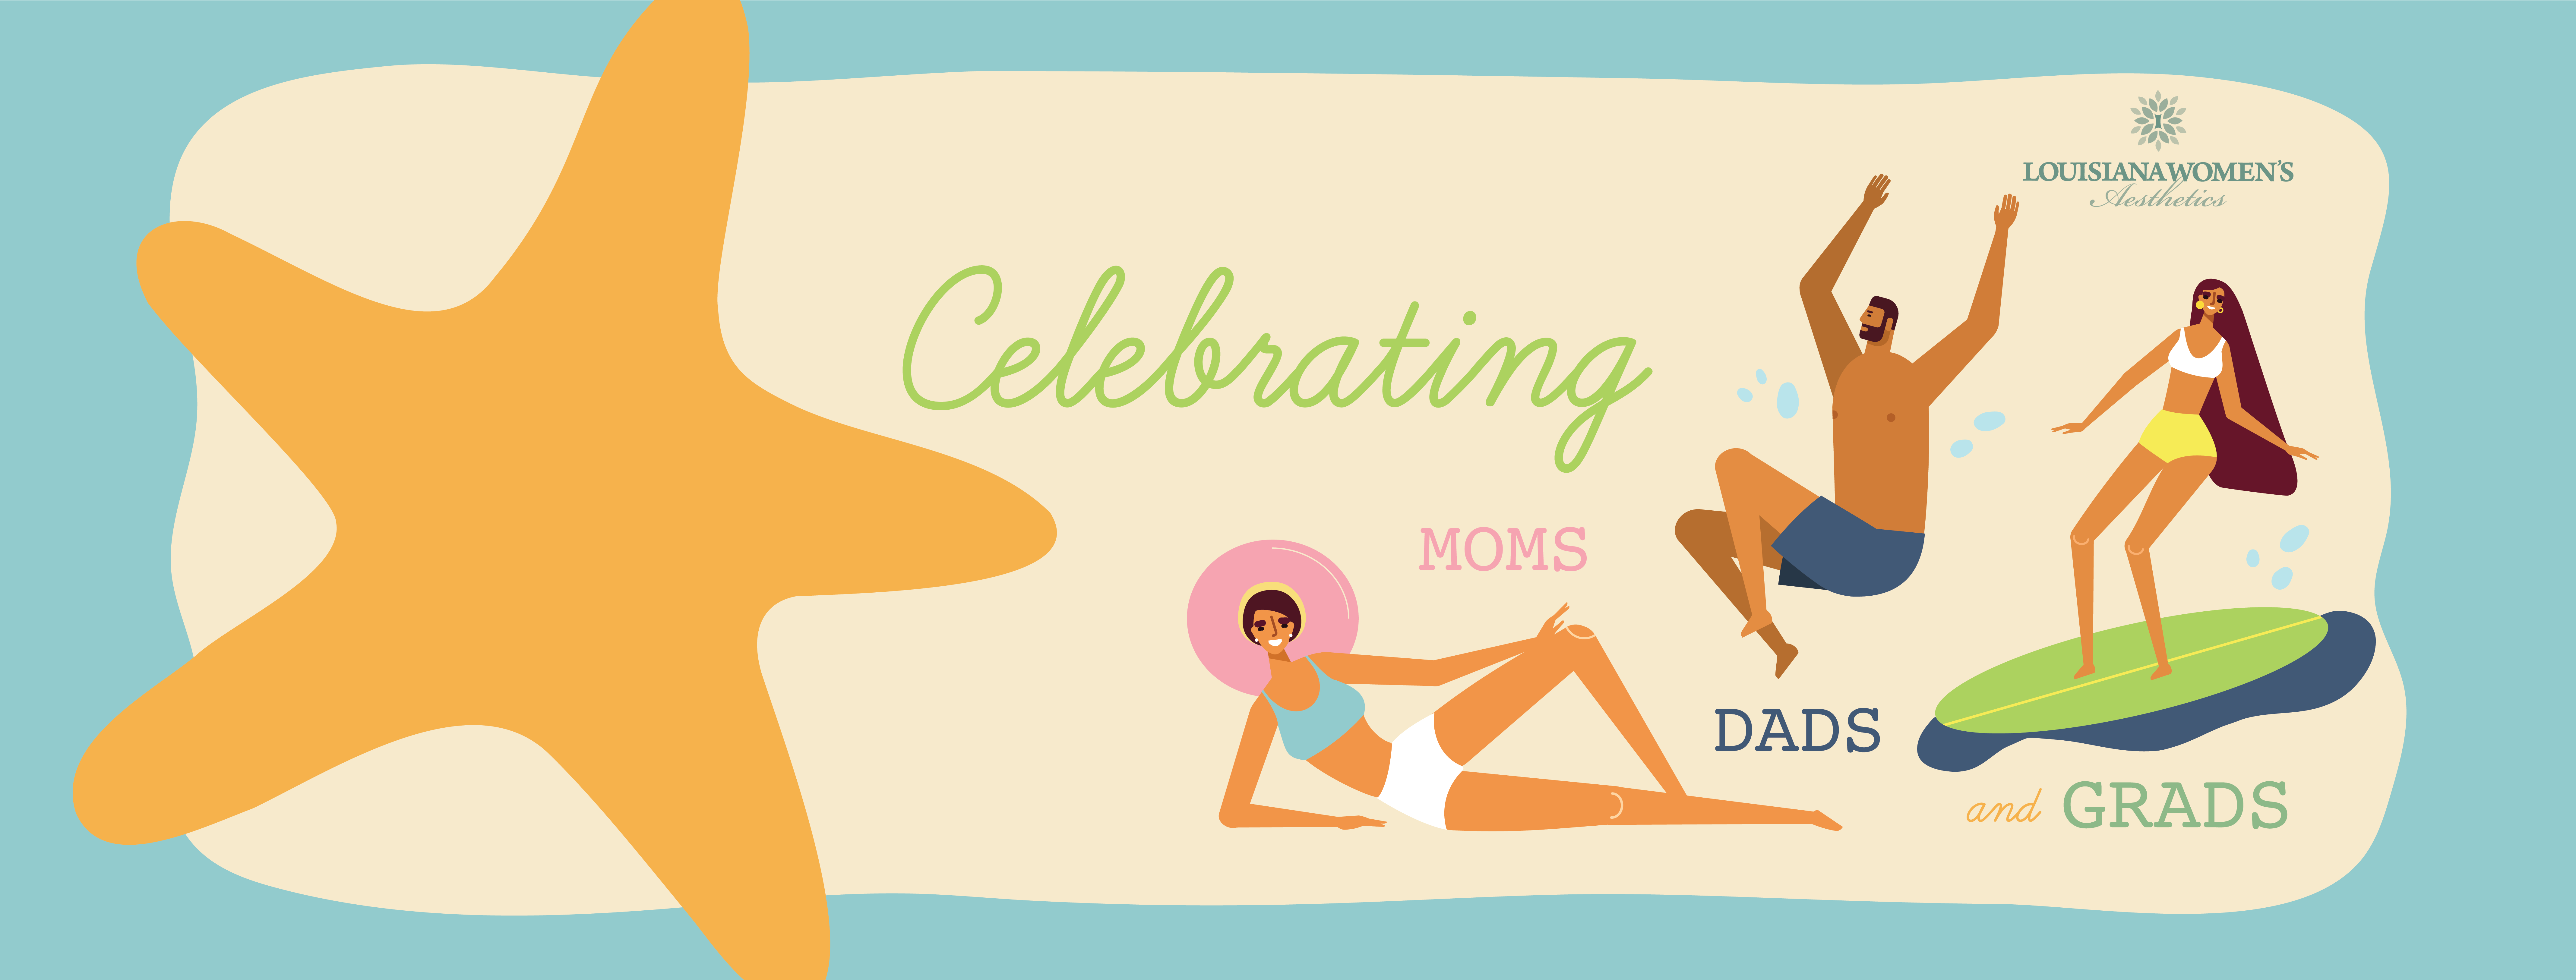 Header image of specials for Moms, Dads, and Grads